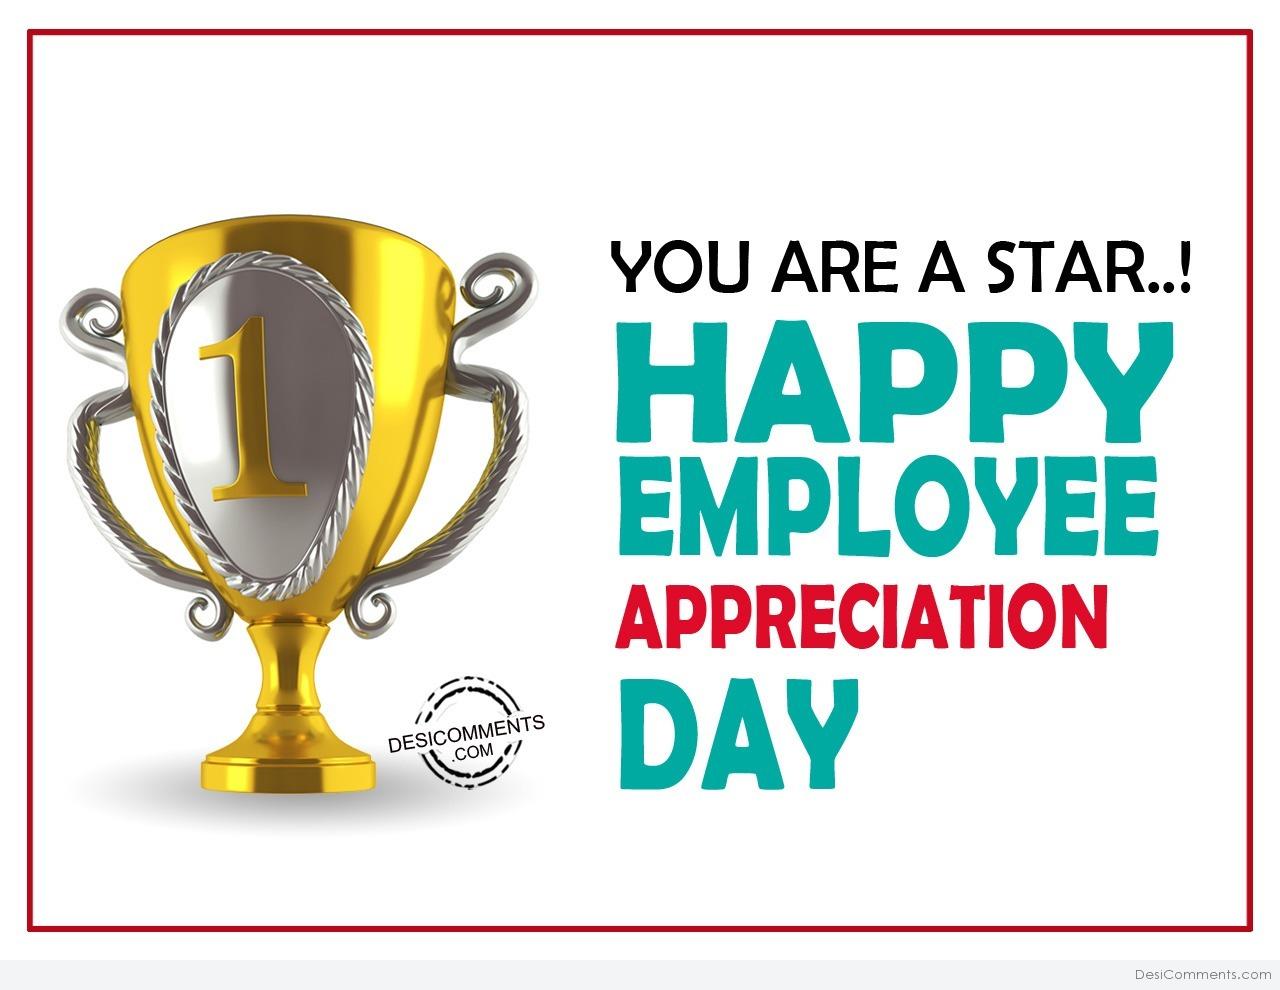 30+ Employee Appreciation Day Images, Pictures, Photos